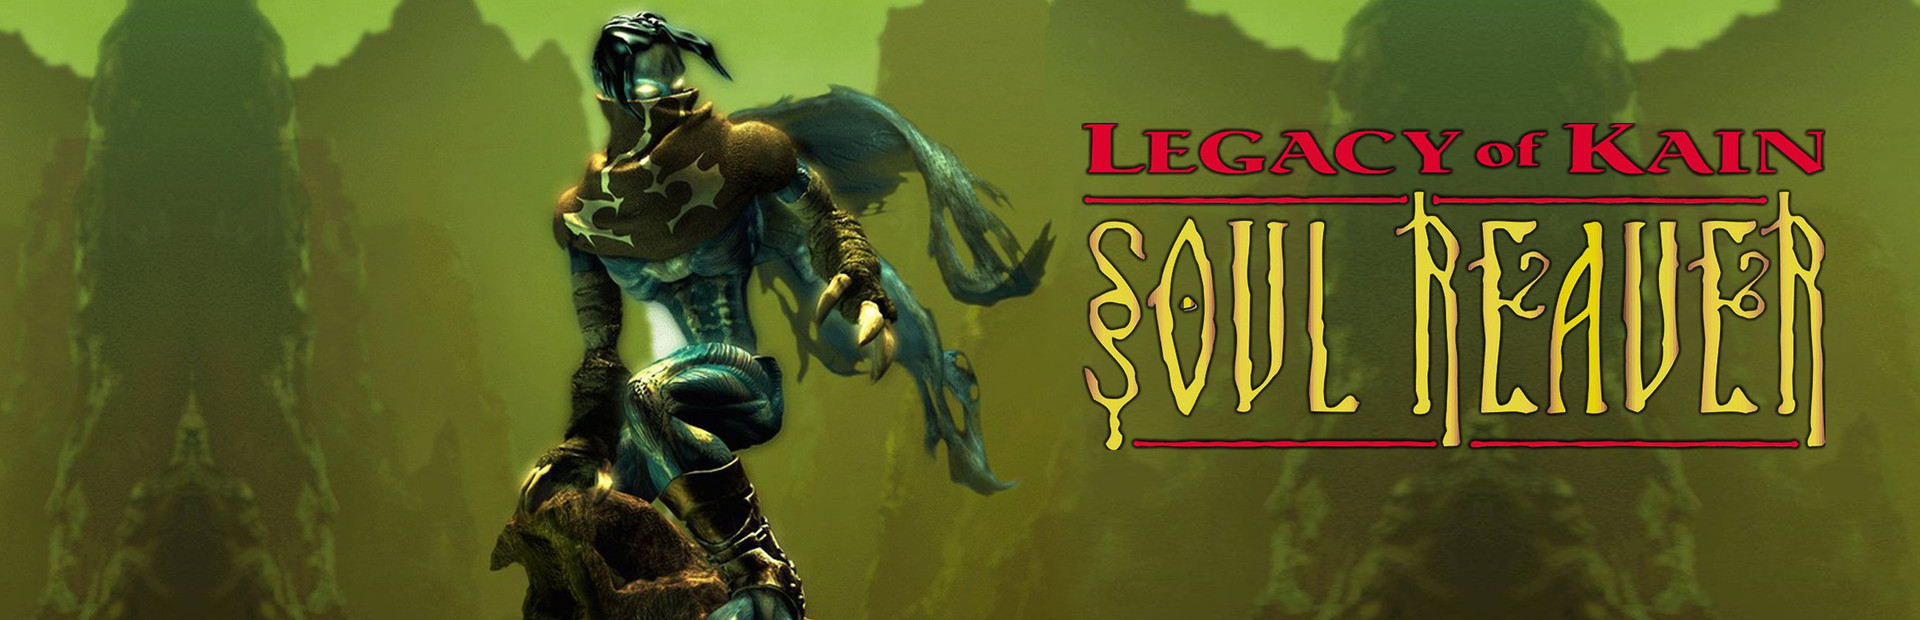 Legacy of Kain: Soul Reaver cover image